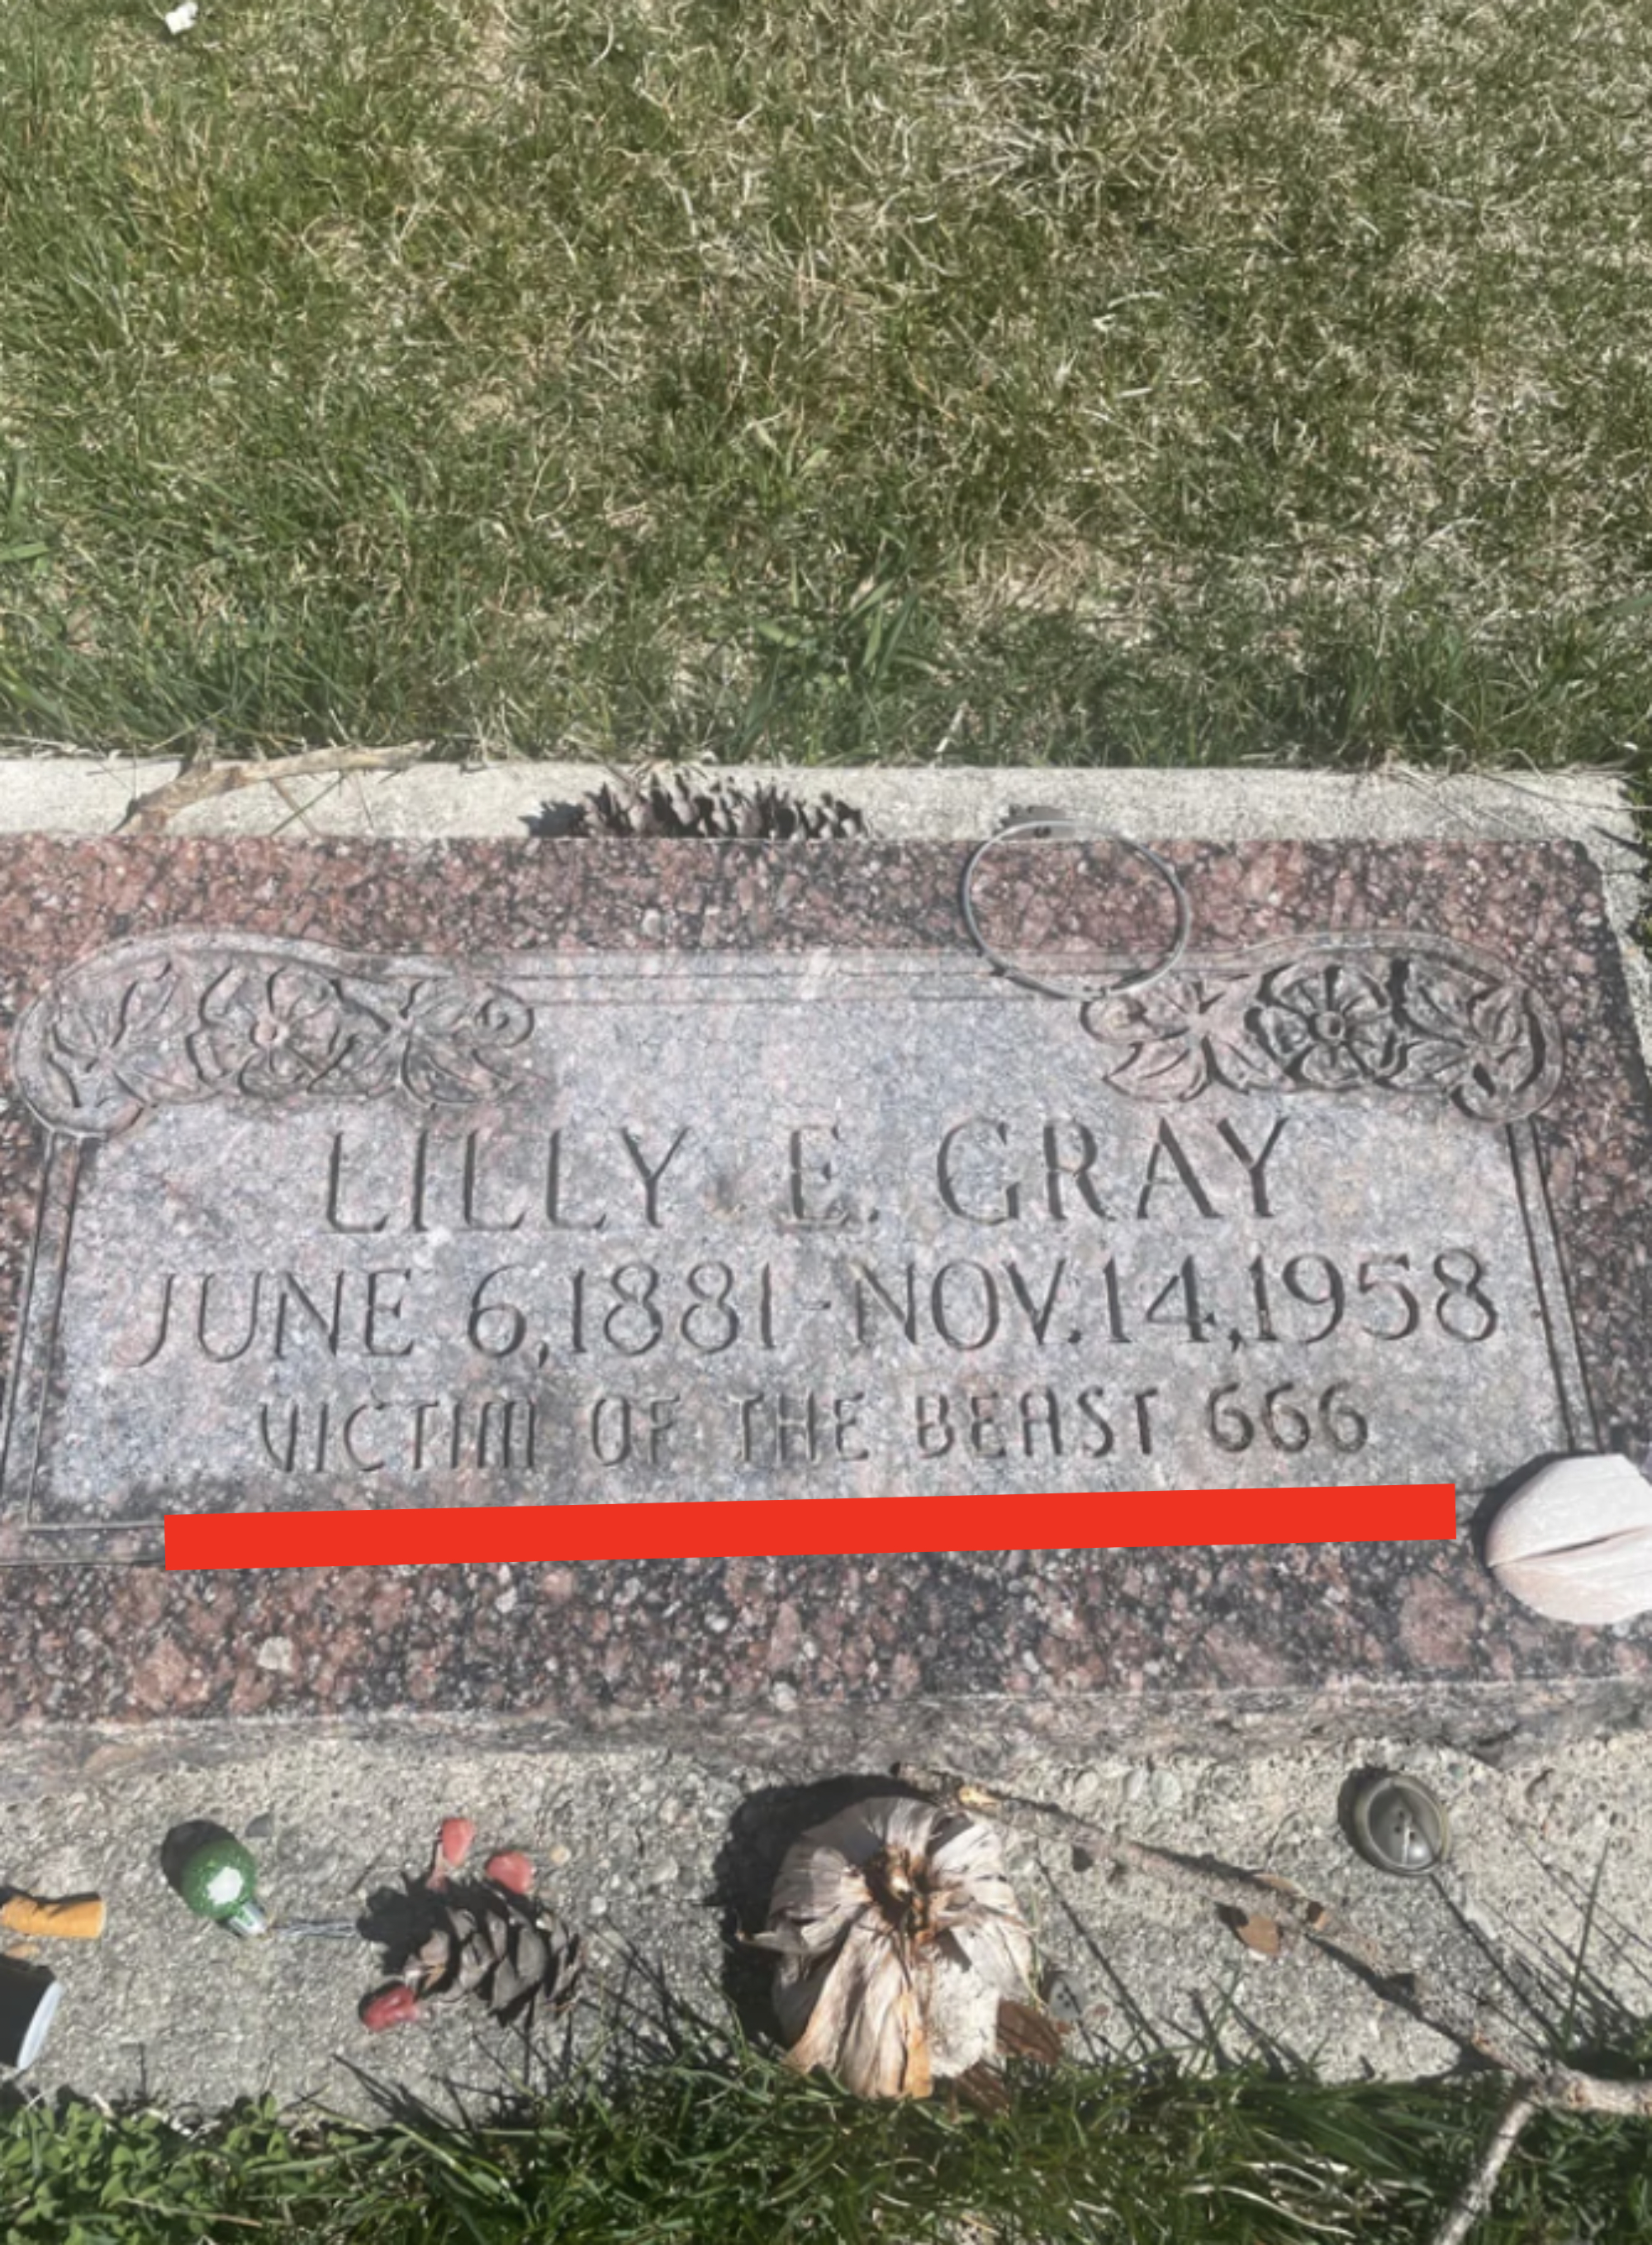 &quot;Lilly E. Gray, June 6, 1881–Nov 14, 1958 / Victim of the Beast 666&quot;